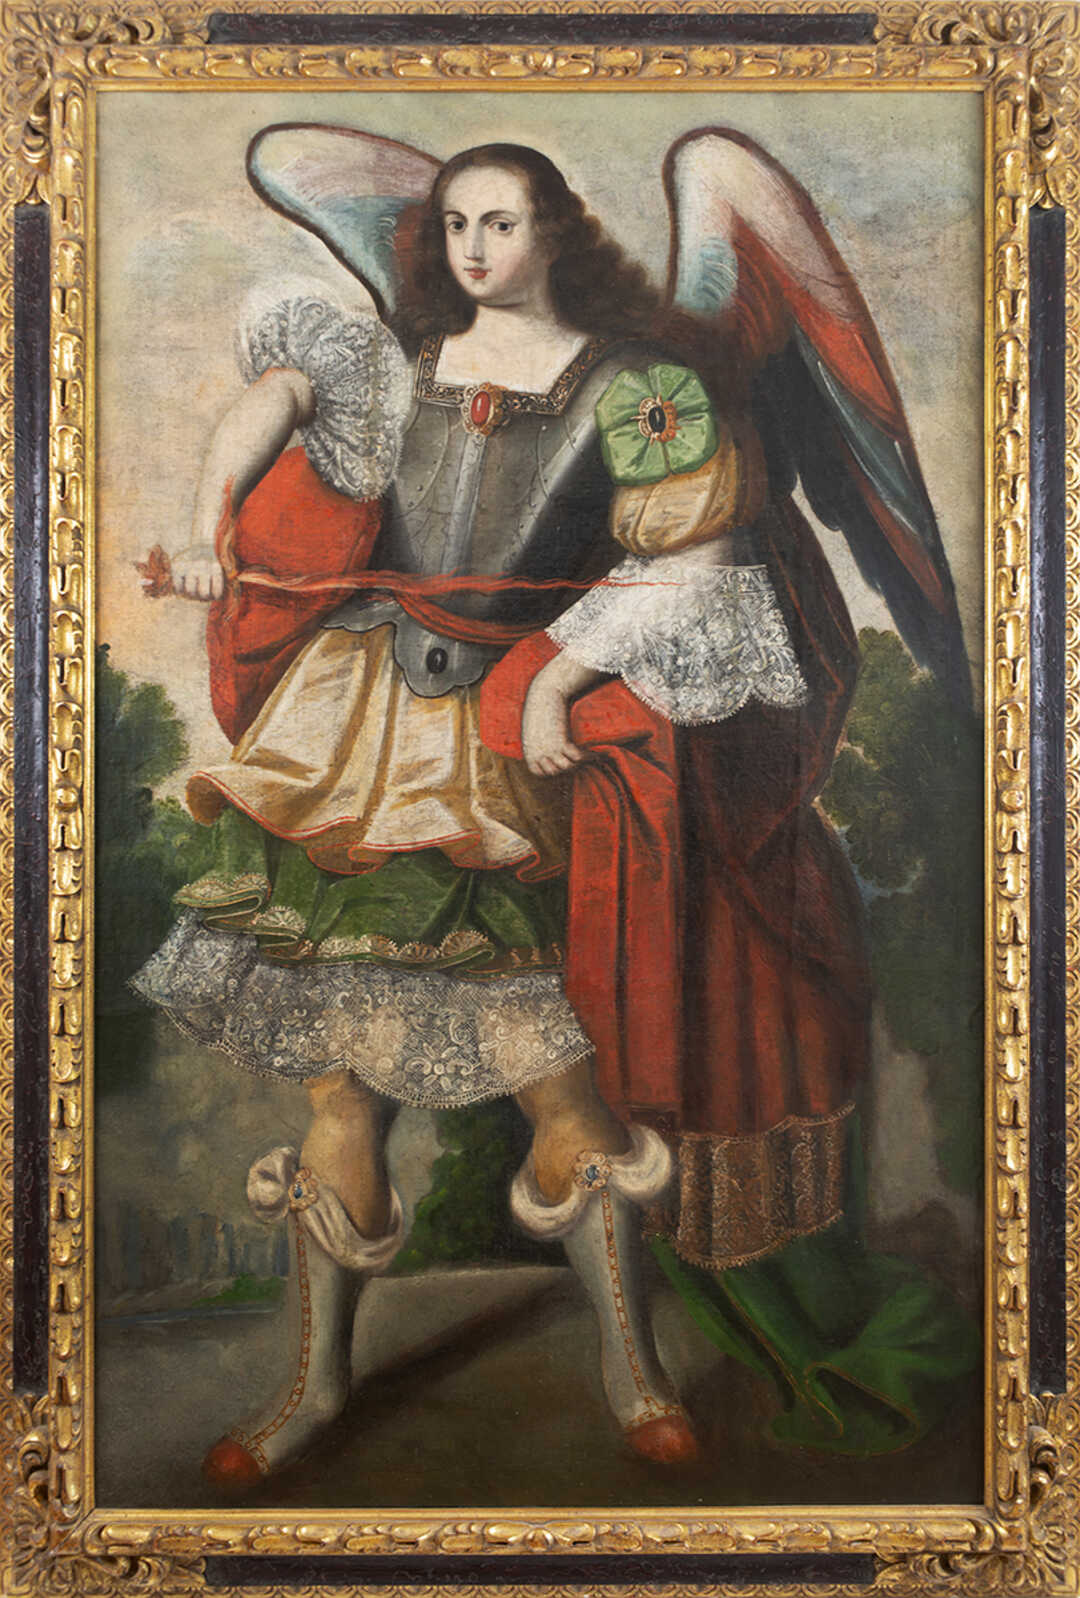 Anonymous | Archangel Uriel (ca. 1675) | Available for Sale | Artsy